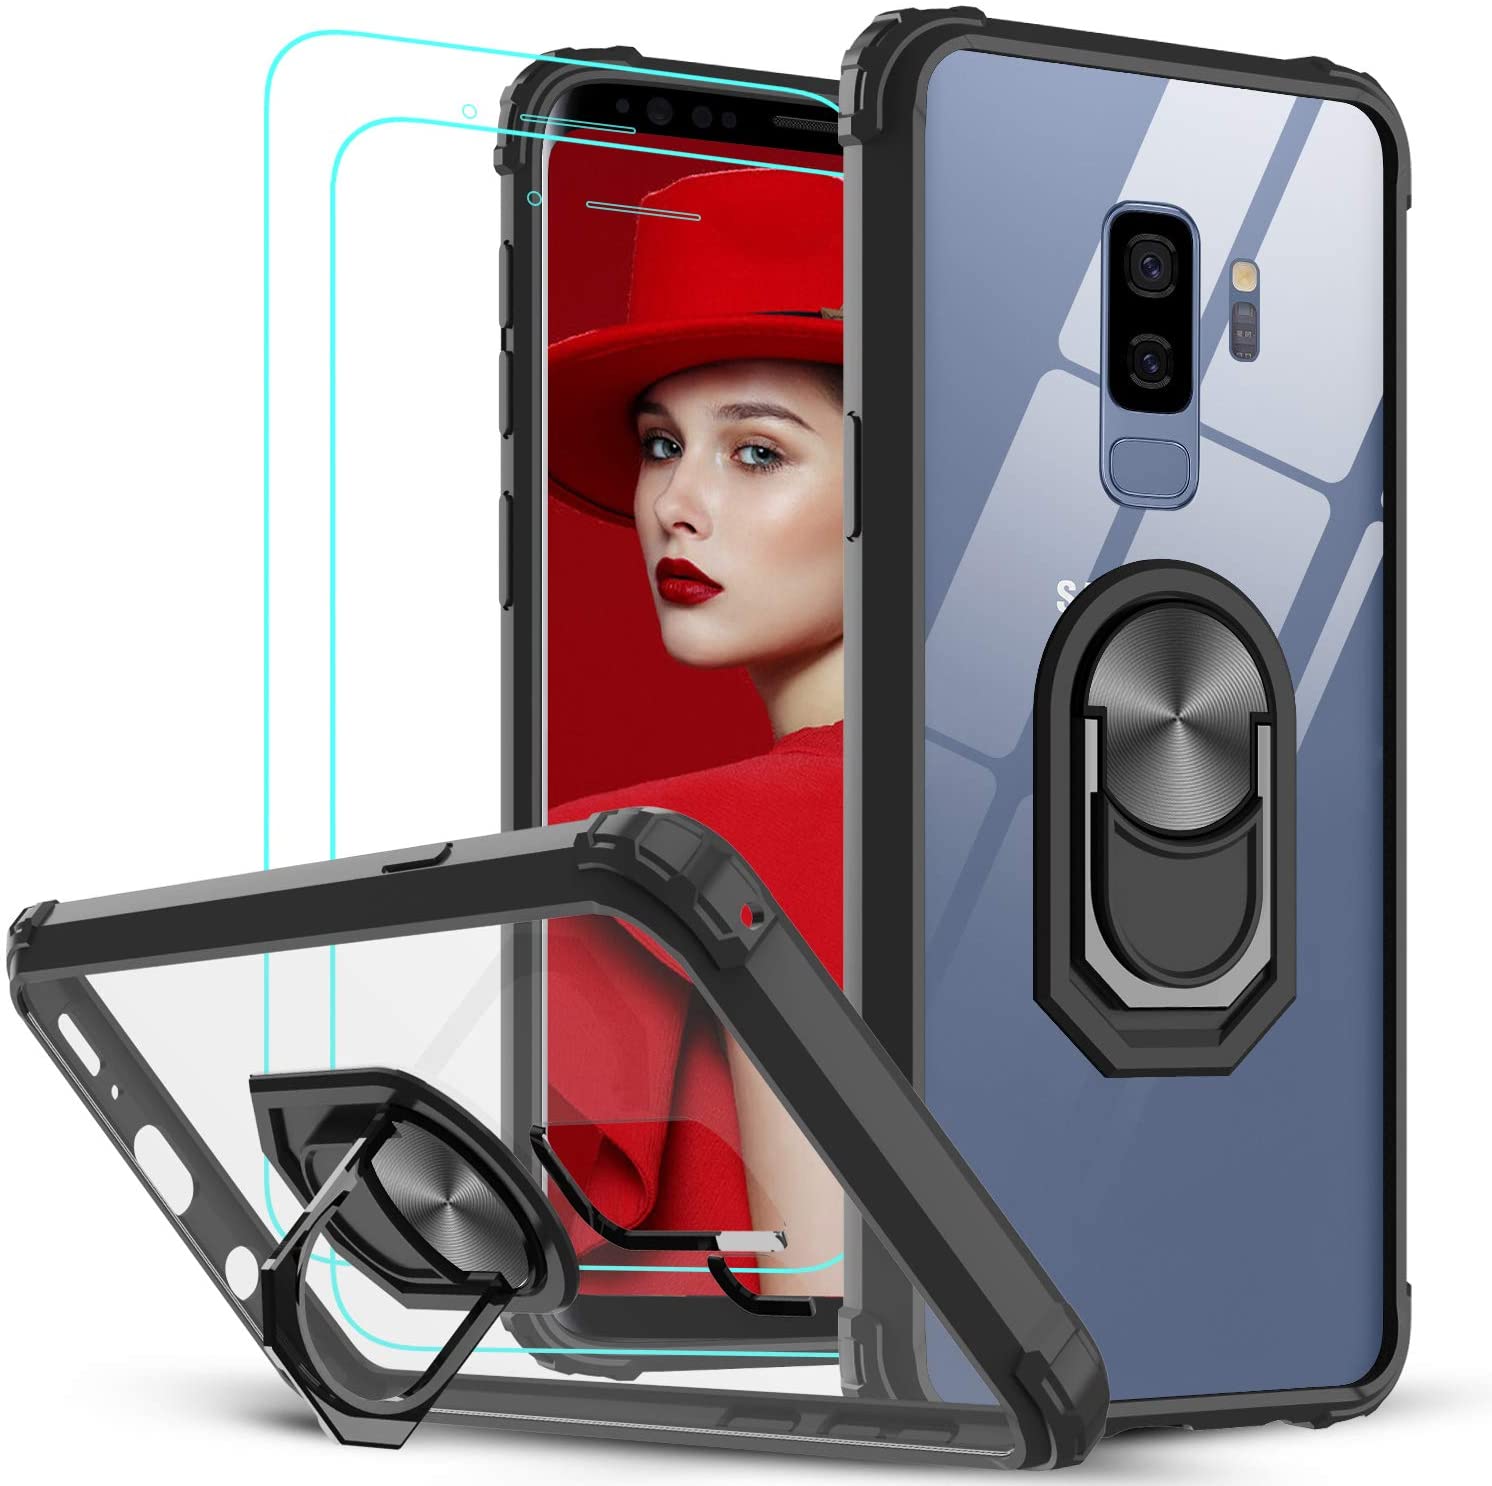 LeYi for Samsung Galaxy S9 Case with 3D Pet Screen -clear - e4cents